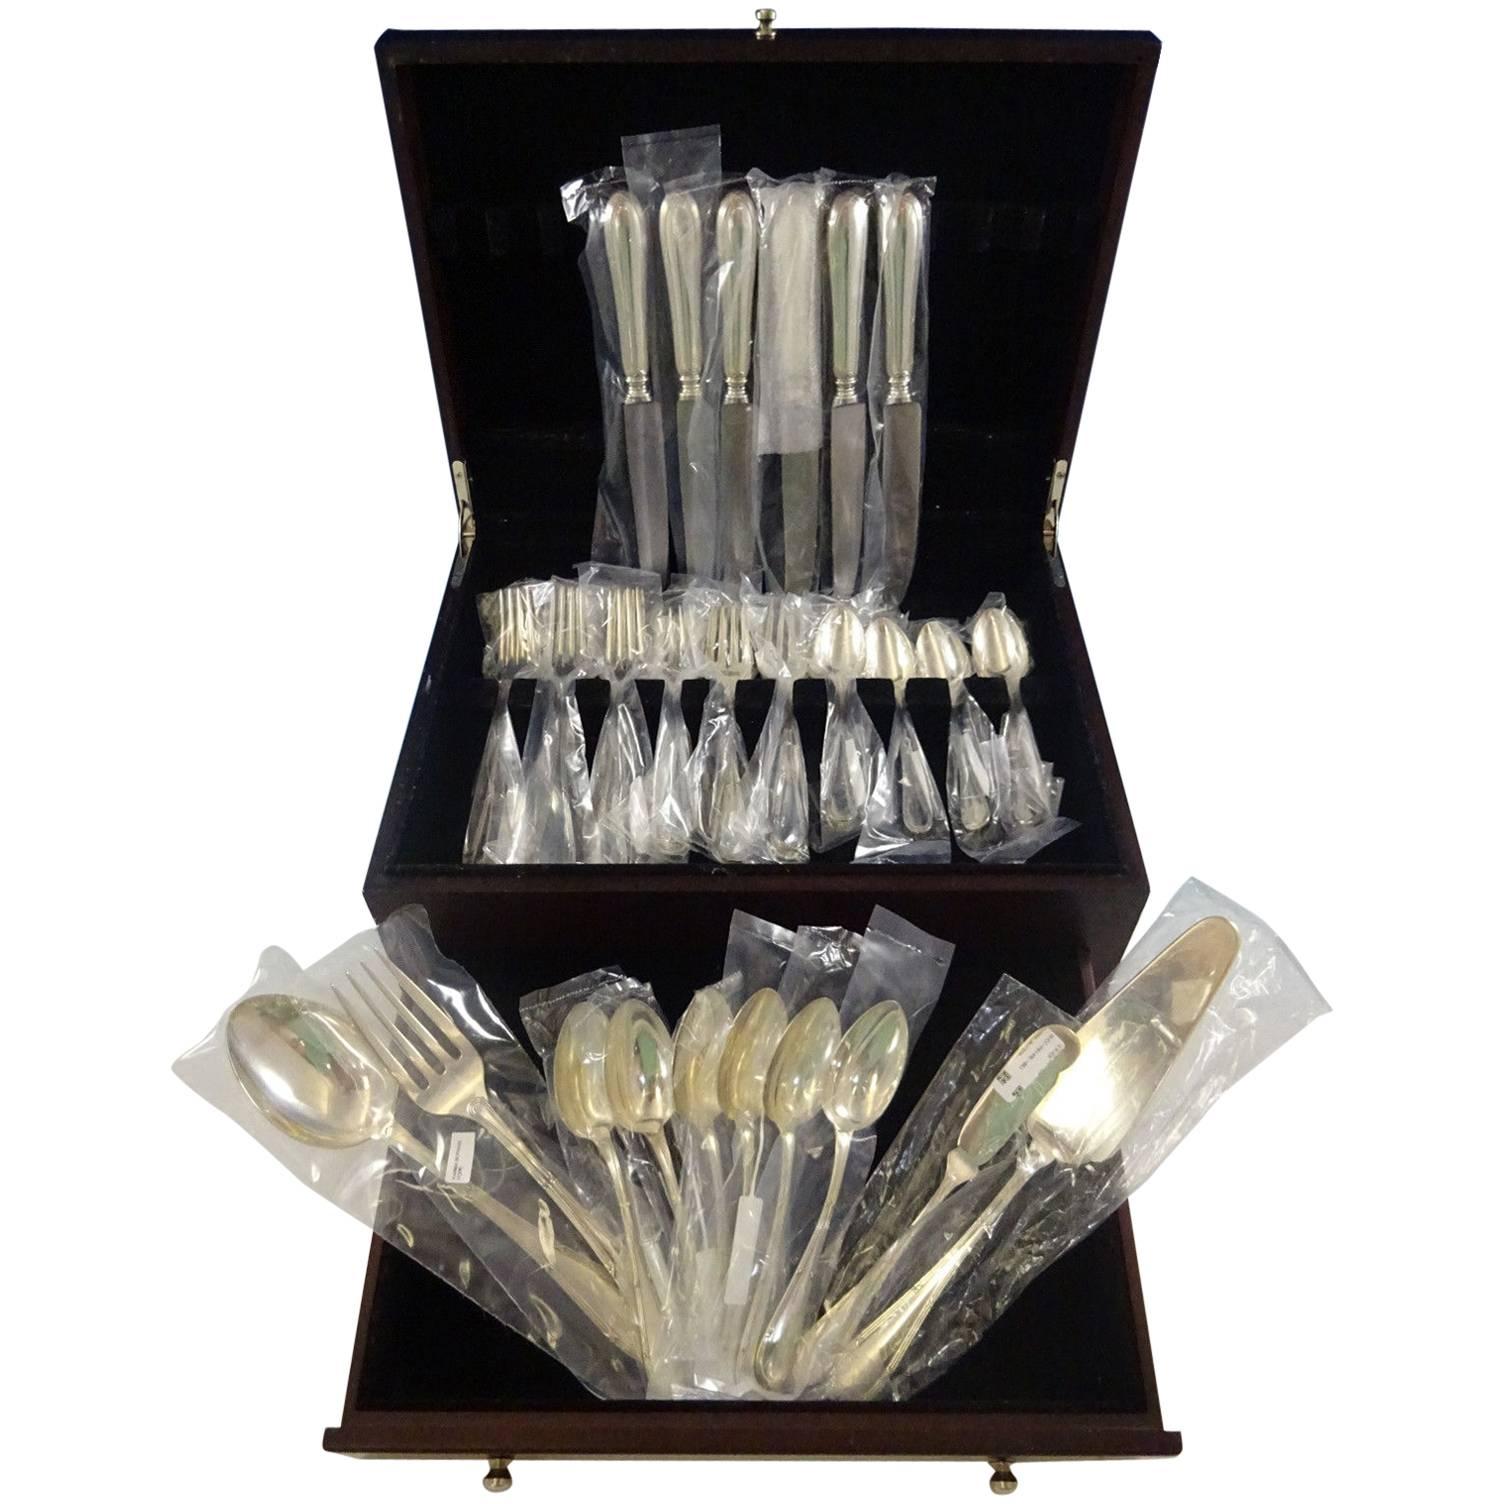 Parma by Buccellati Italy Sterling Silver Flatware Service Dinner Set 34 Pc, New